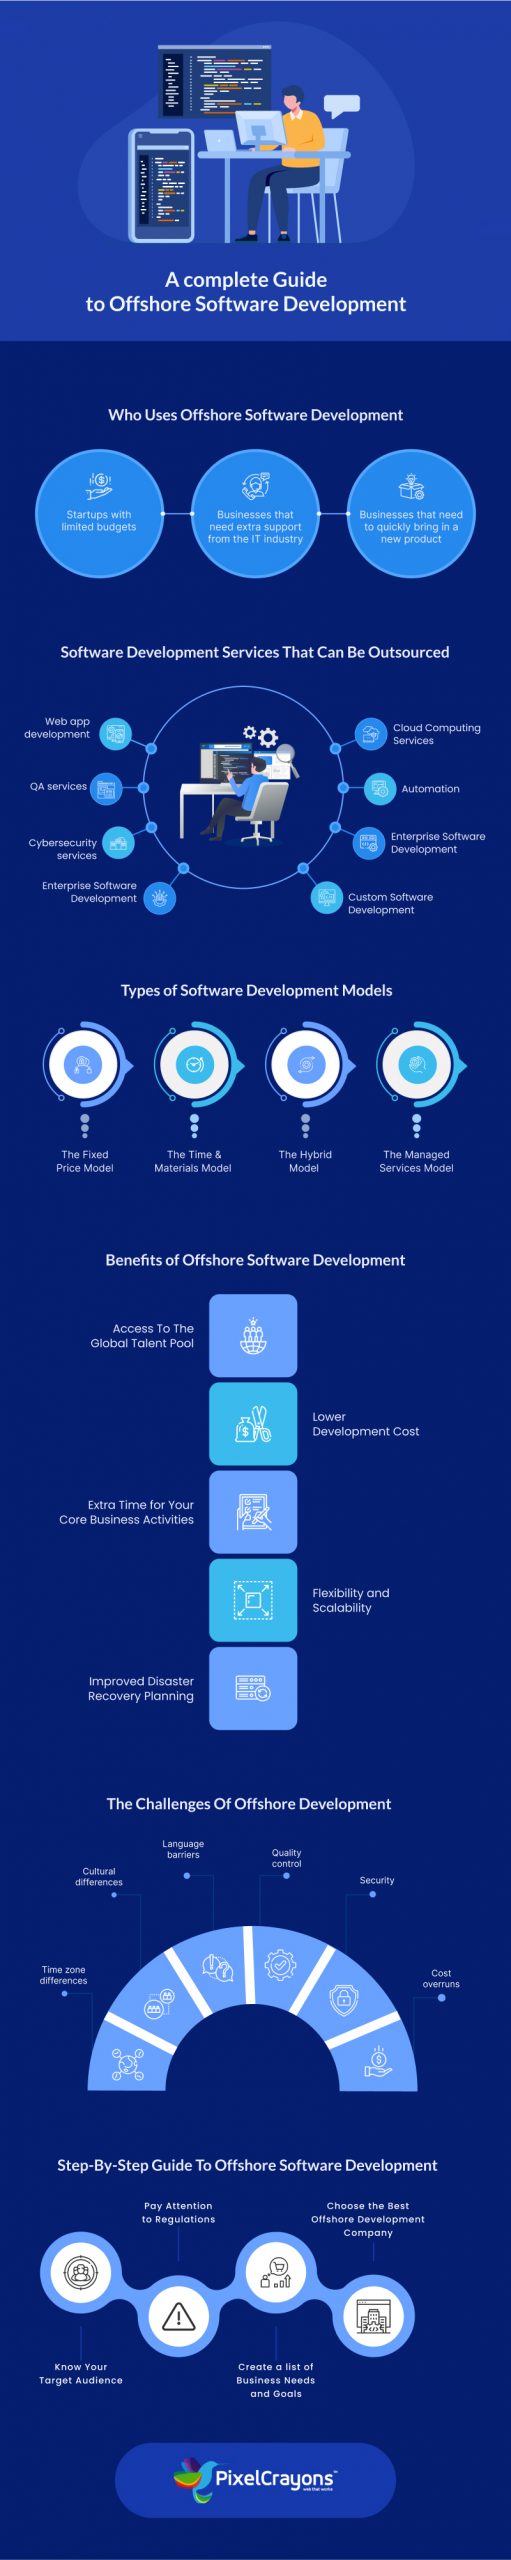 A complete Guide to Offshore Software Development infographic